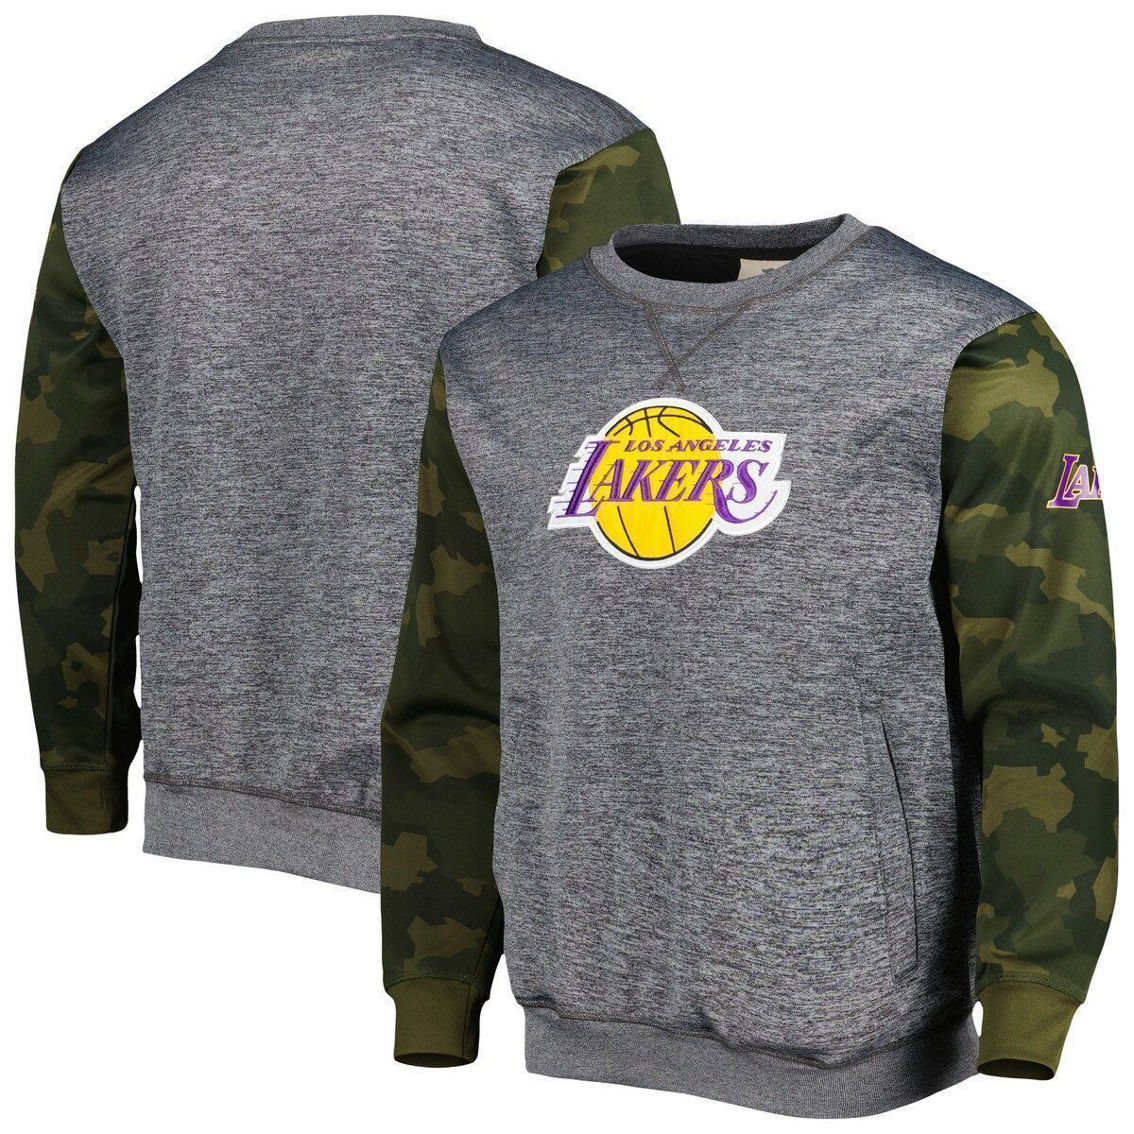 Fanatics Branded Men's Heather Charcoal Los Angeles Lakers Camo Stitched Sweatshirt - Image 2 of 4